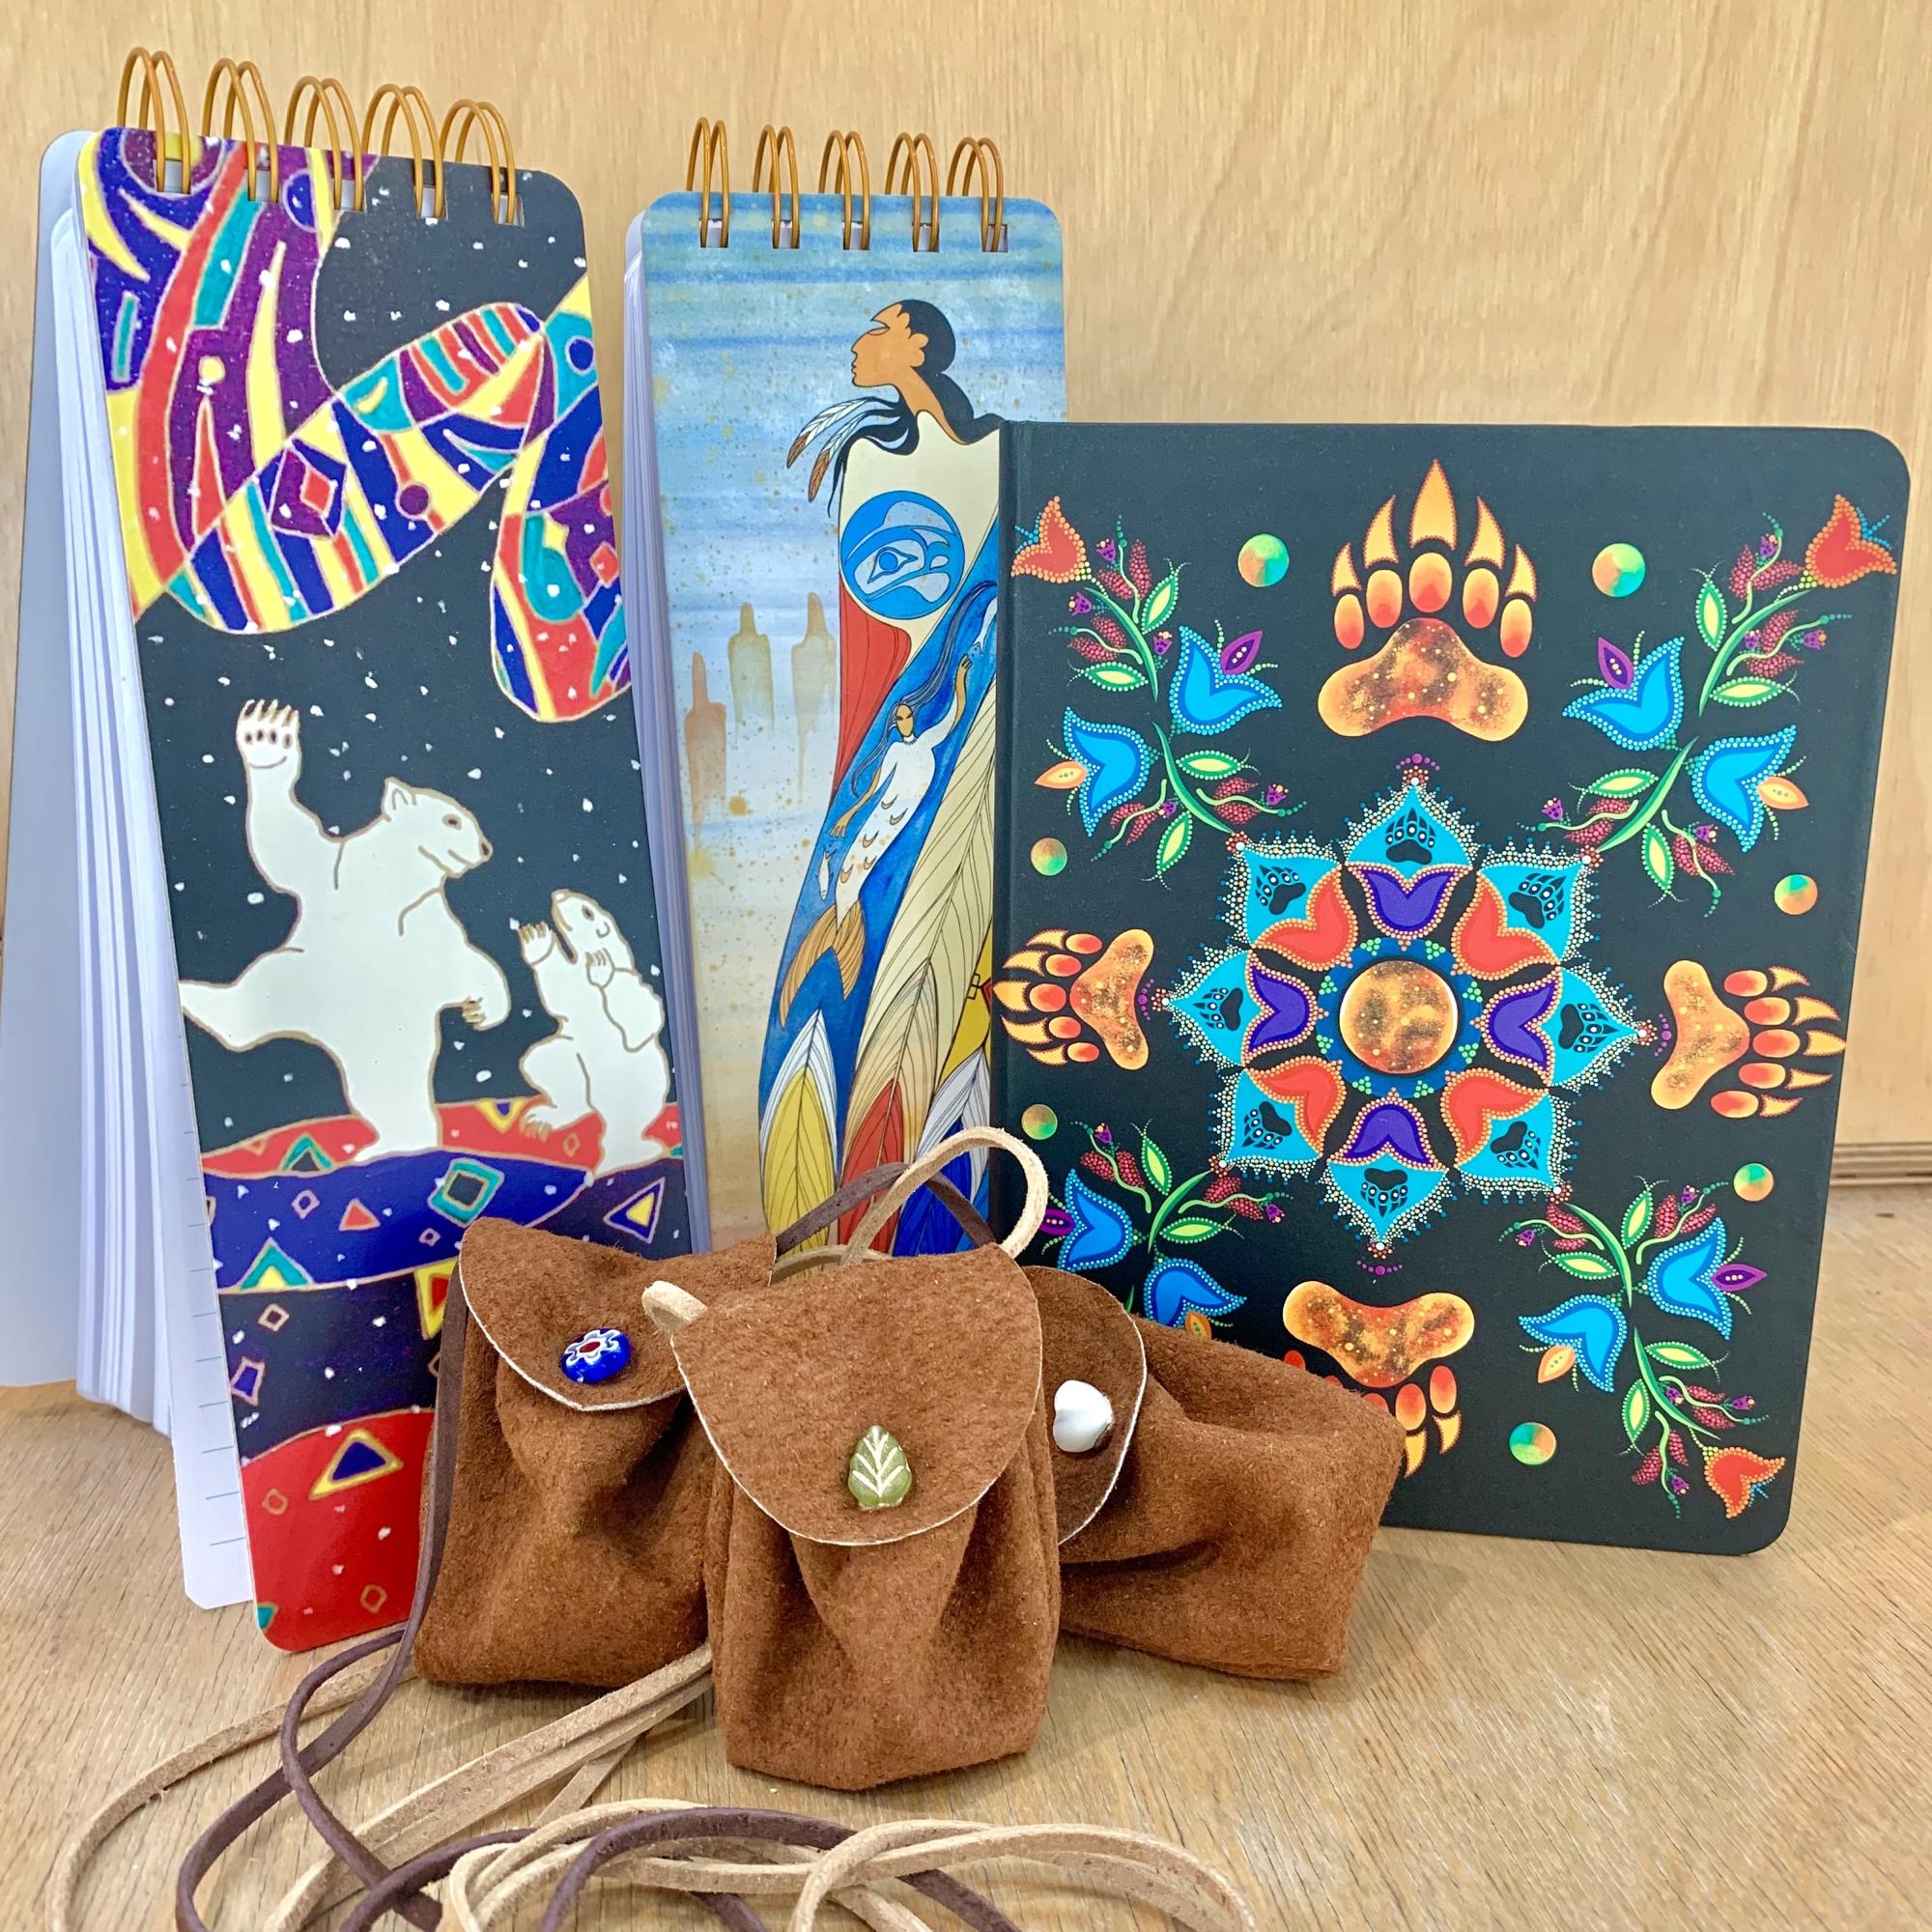 three leather medicine bags sit atop a wooden surface in front of 3 notebooks with colourful designs on them created by Indigenous artists